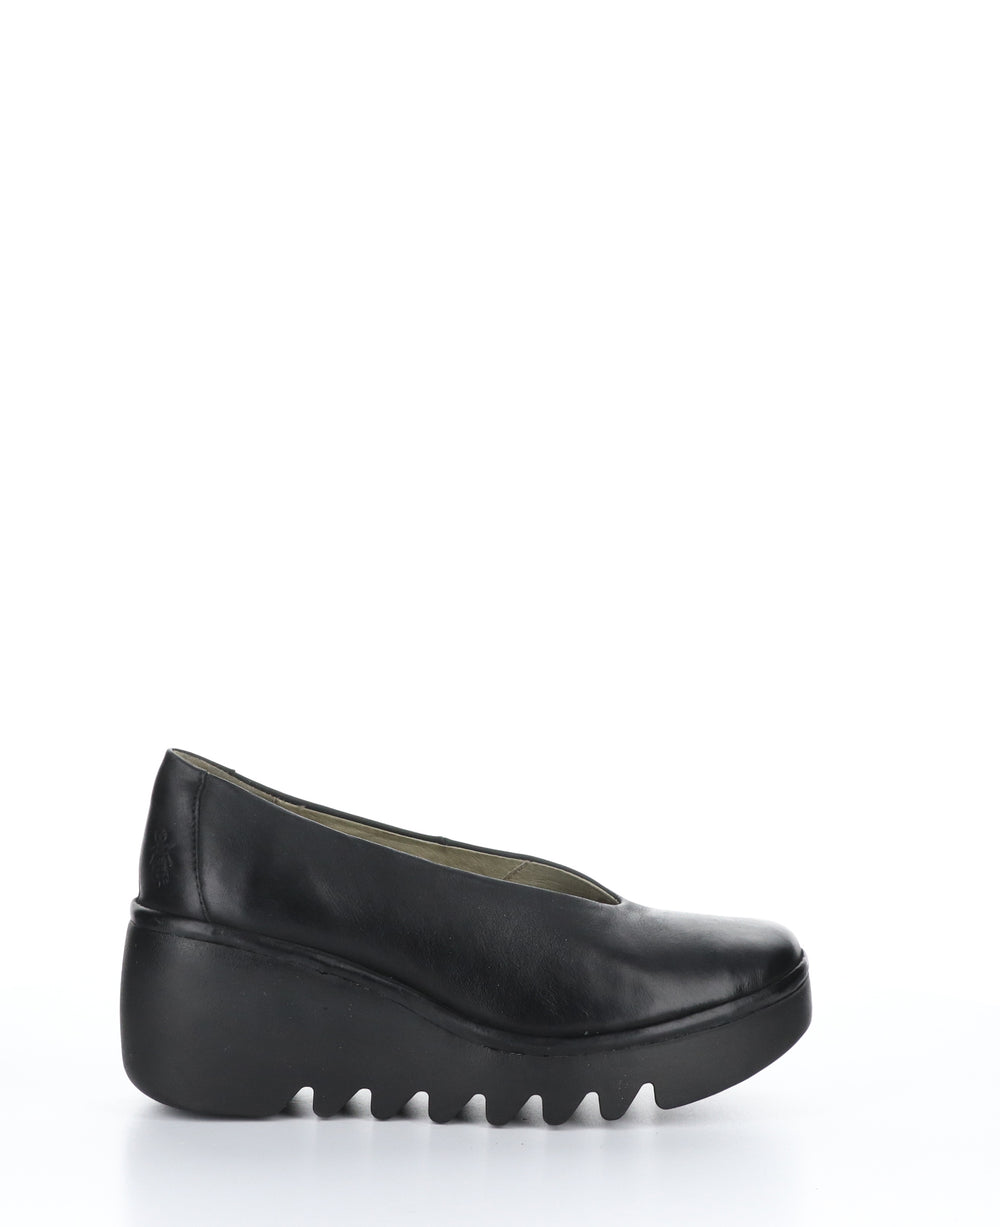 BESO246FLY Verona Black Wedge Shoes|BESO246FLY Chaussures Compensés in Noir